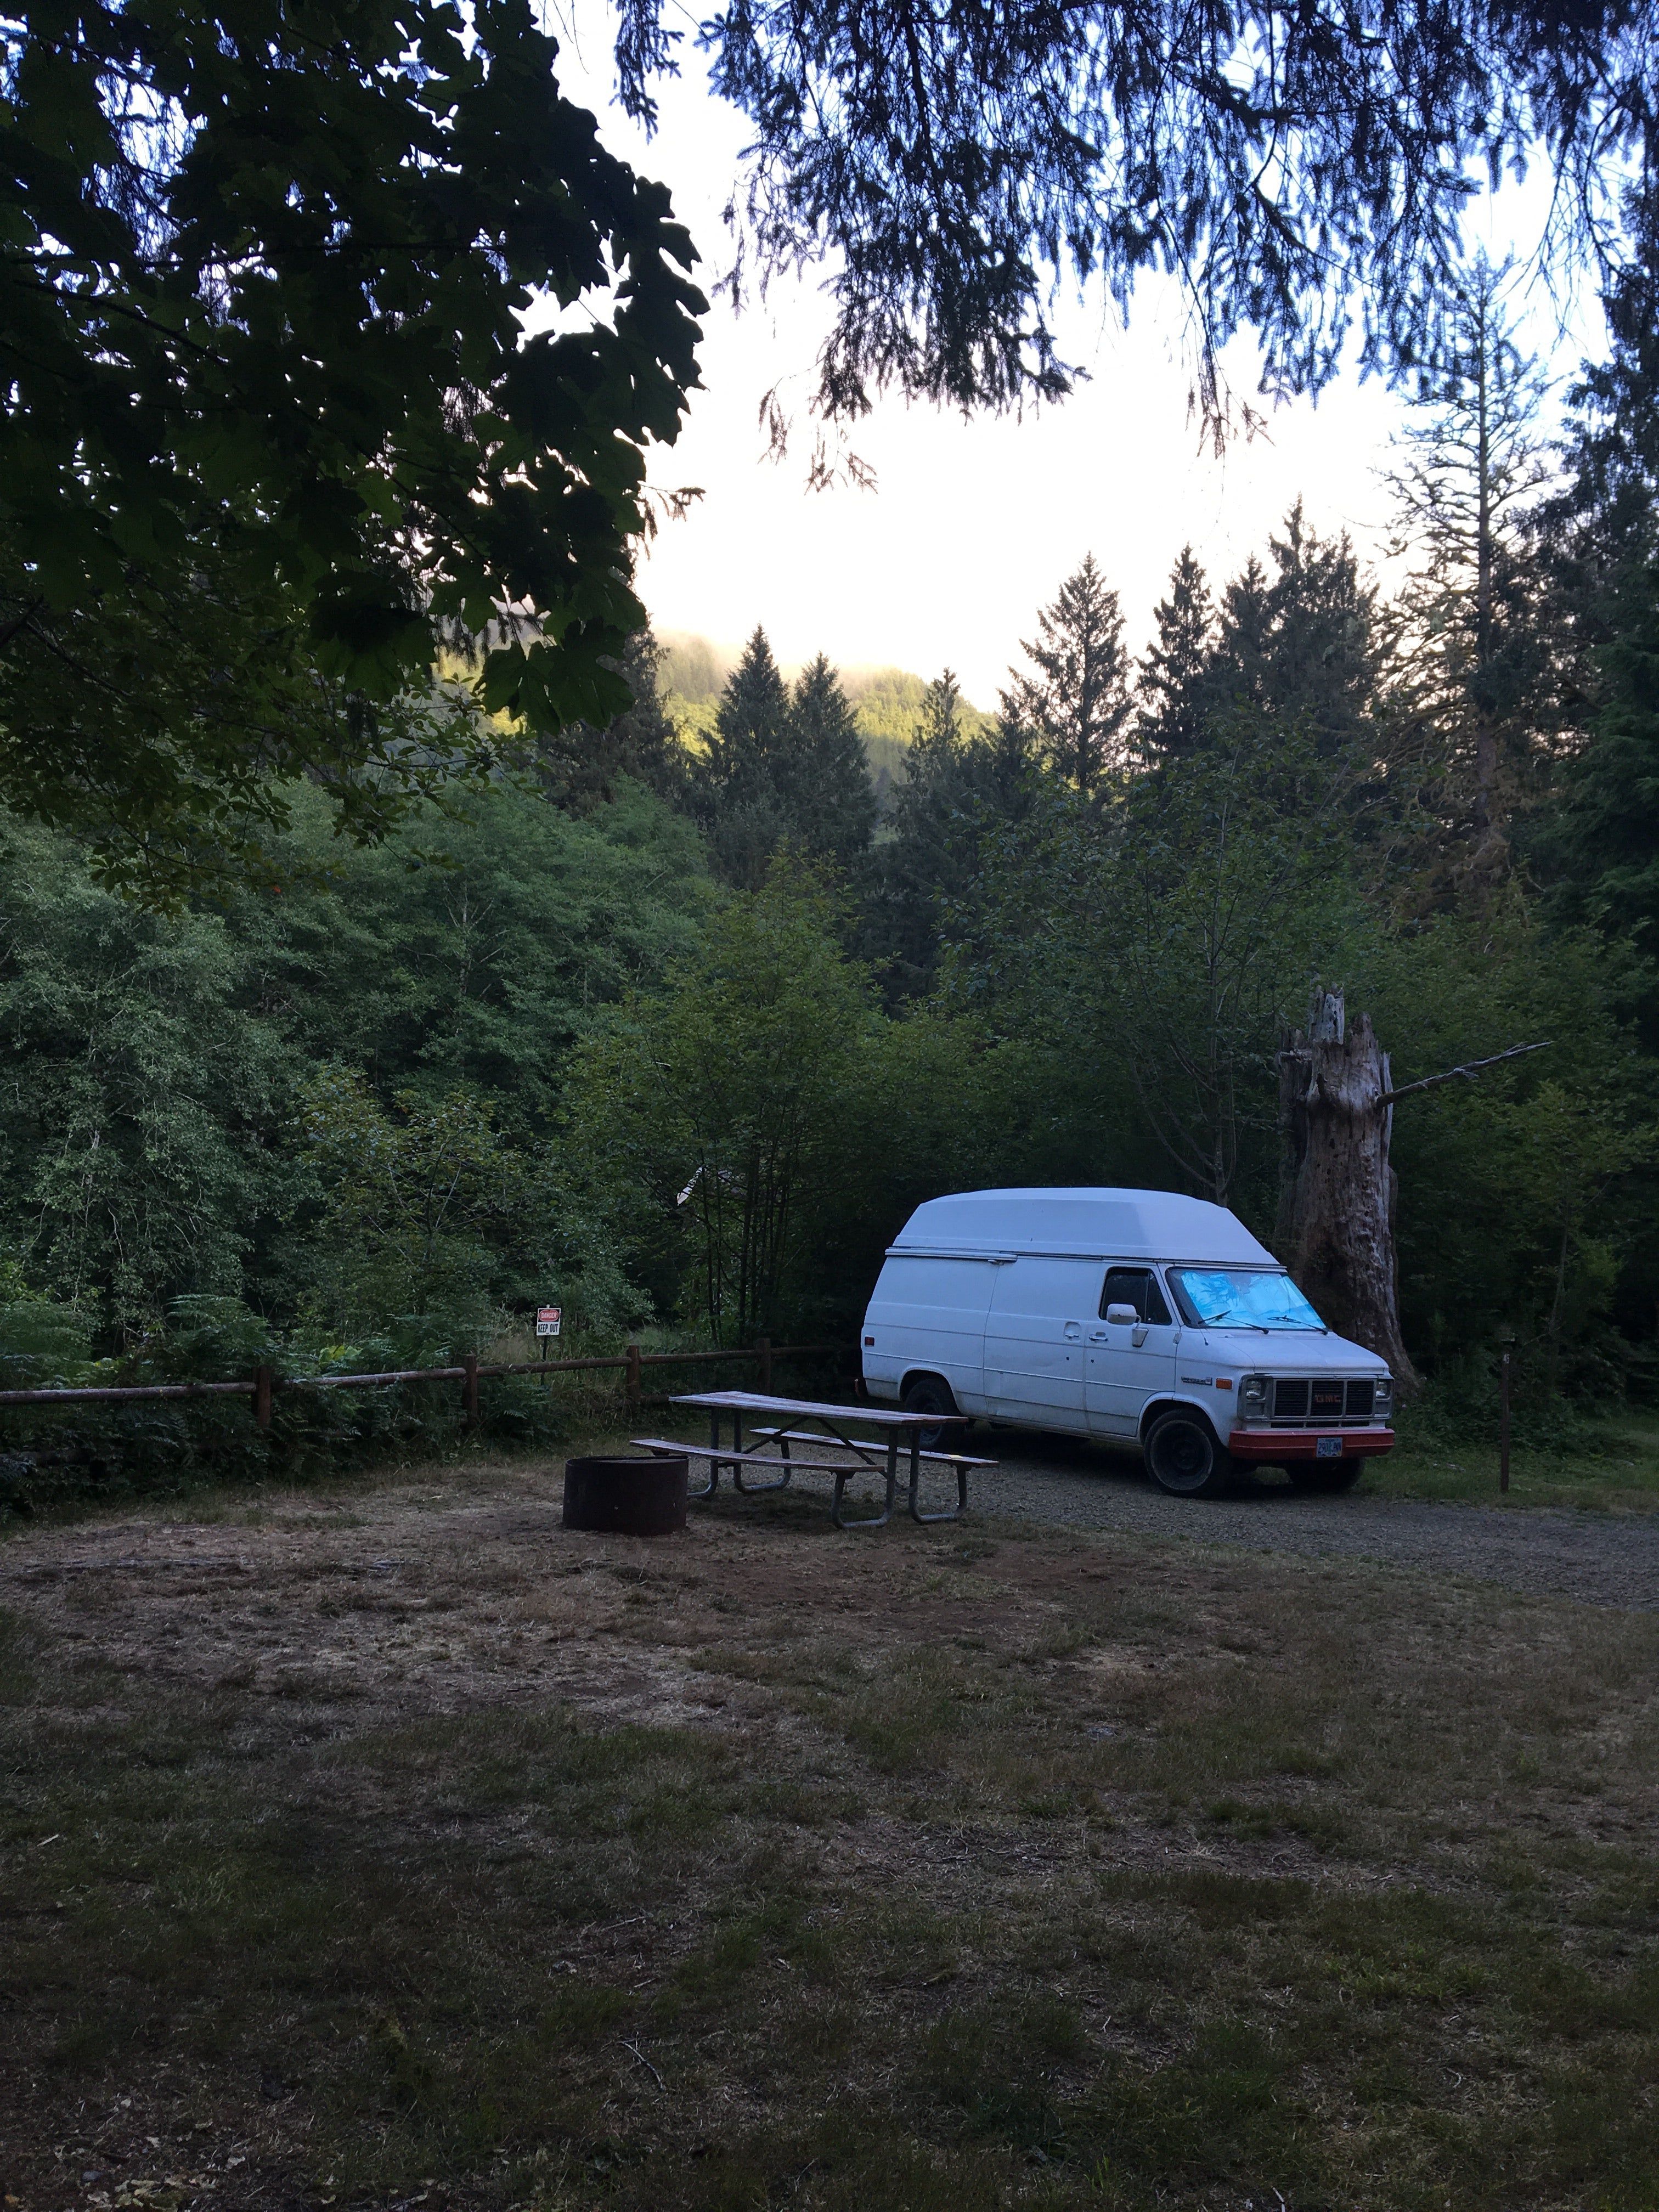 Camper submitted image from Kilchis Park - 5